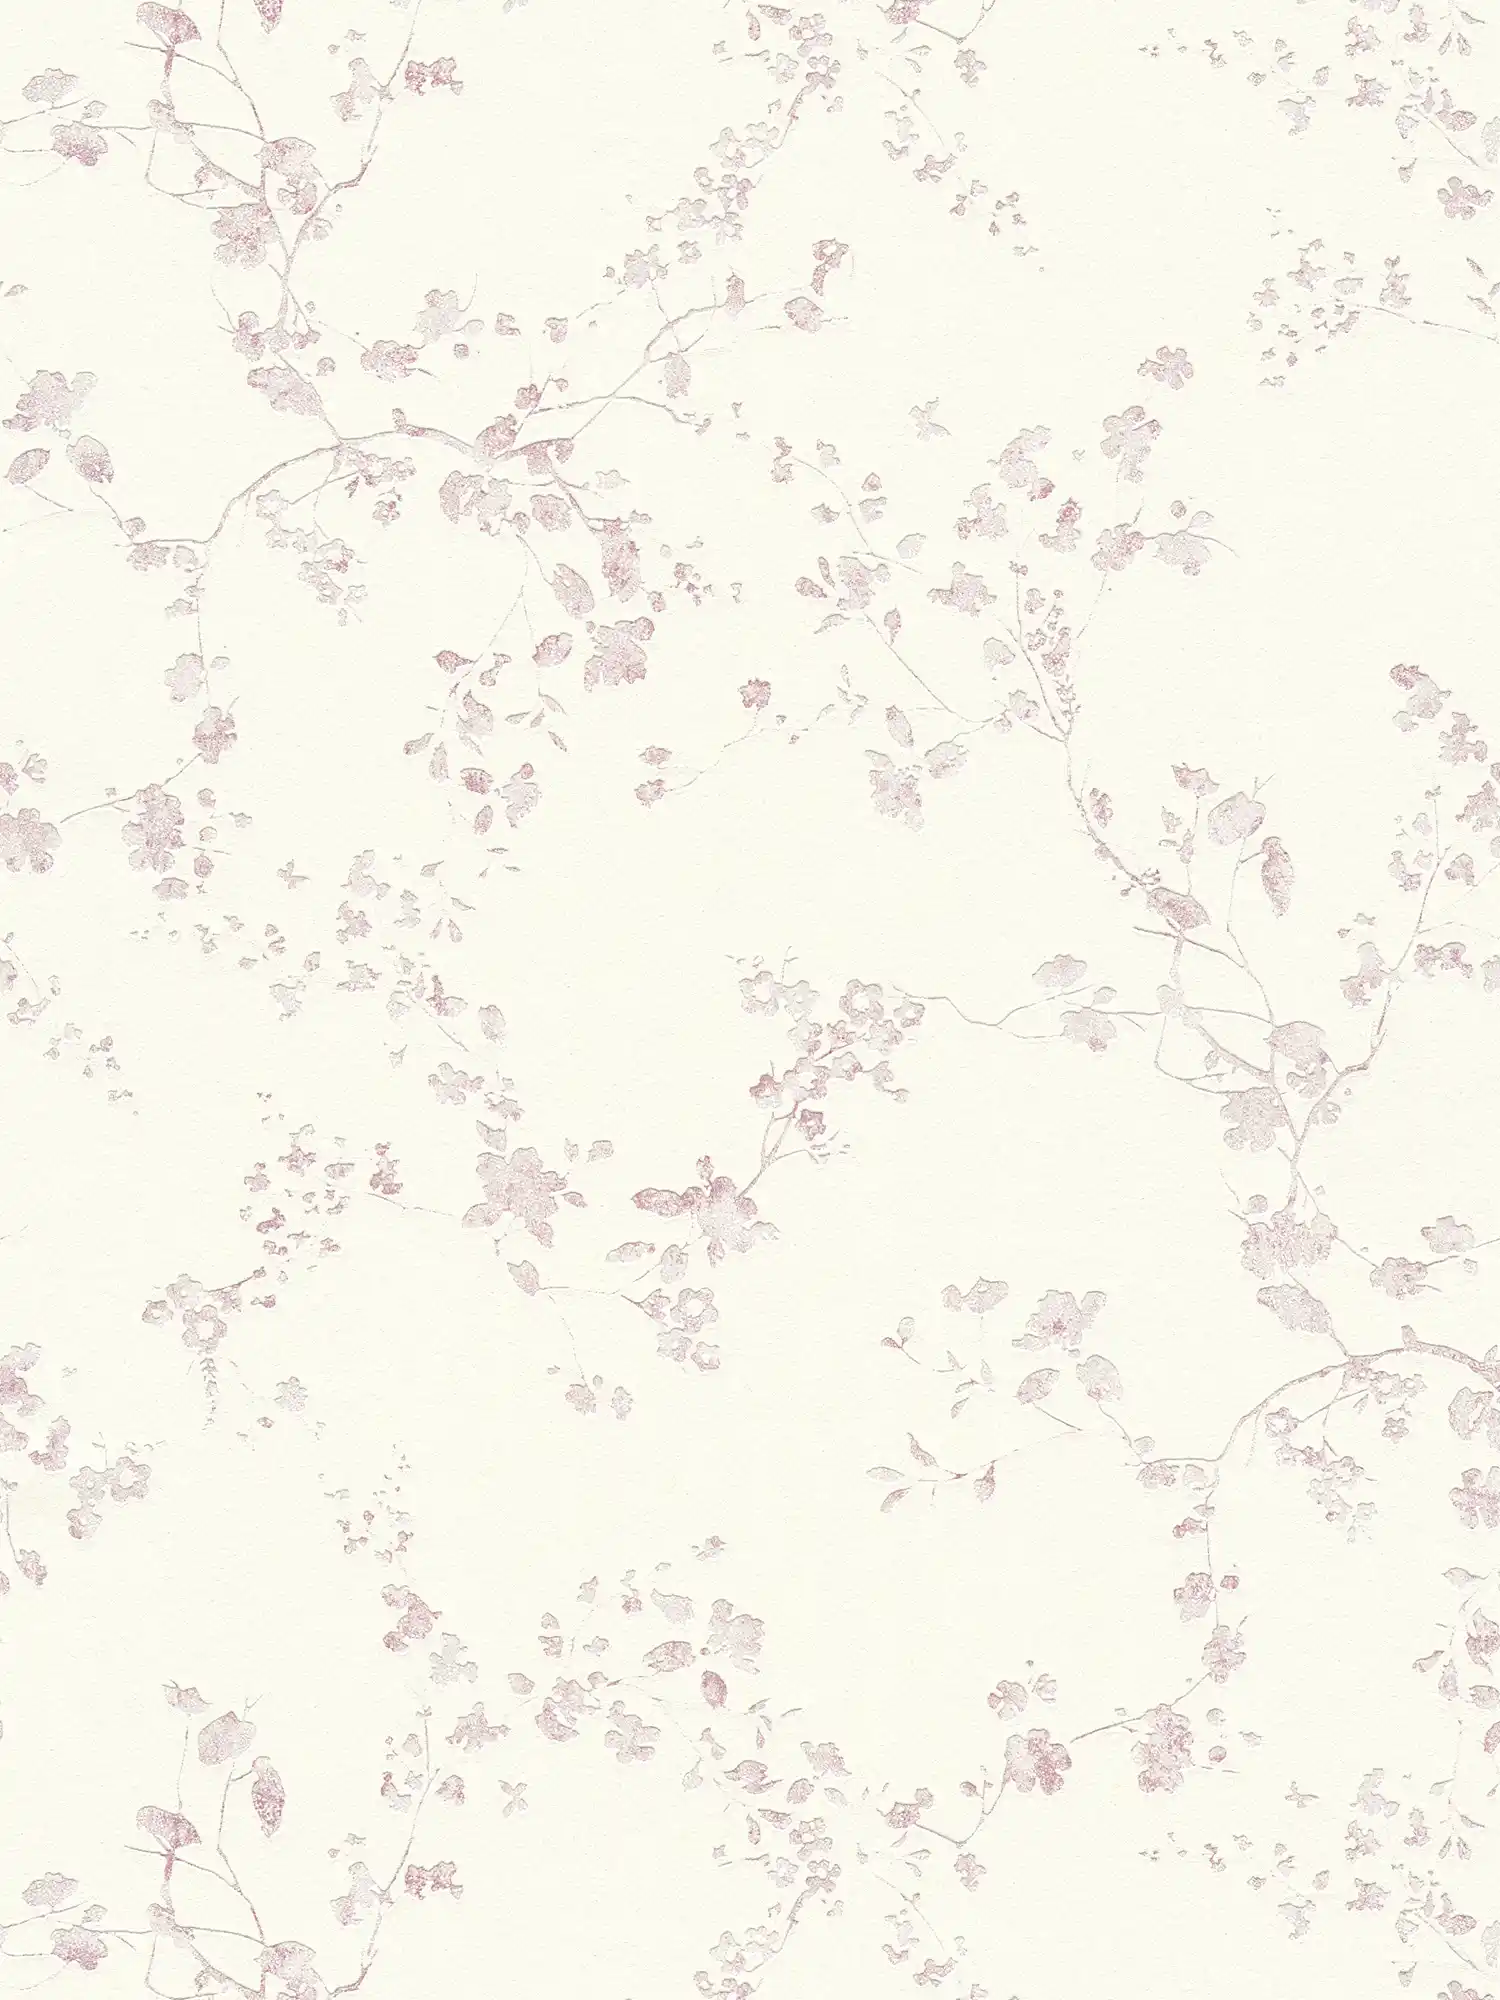 Flowers non-woven wallpaper in country style - purple, cream
